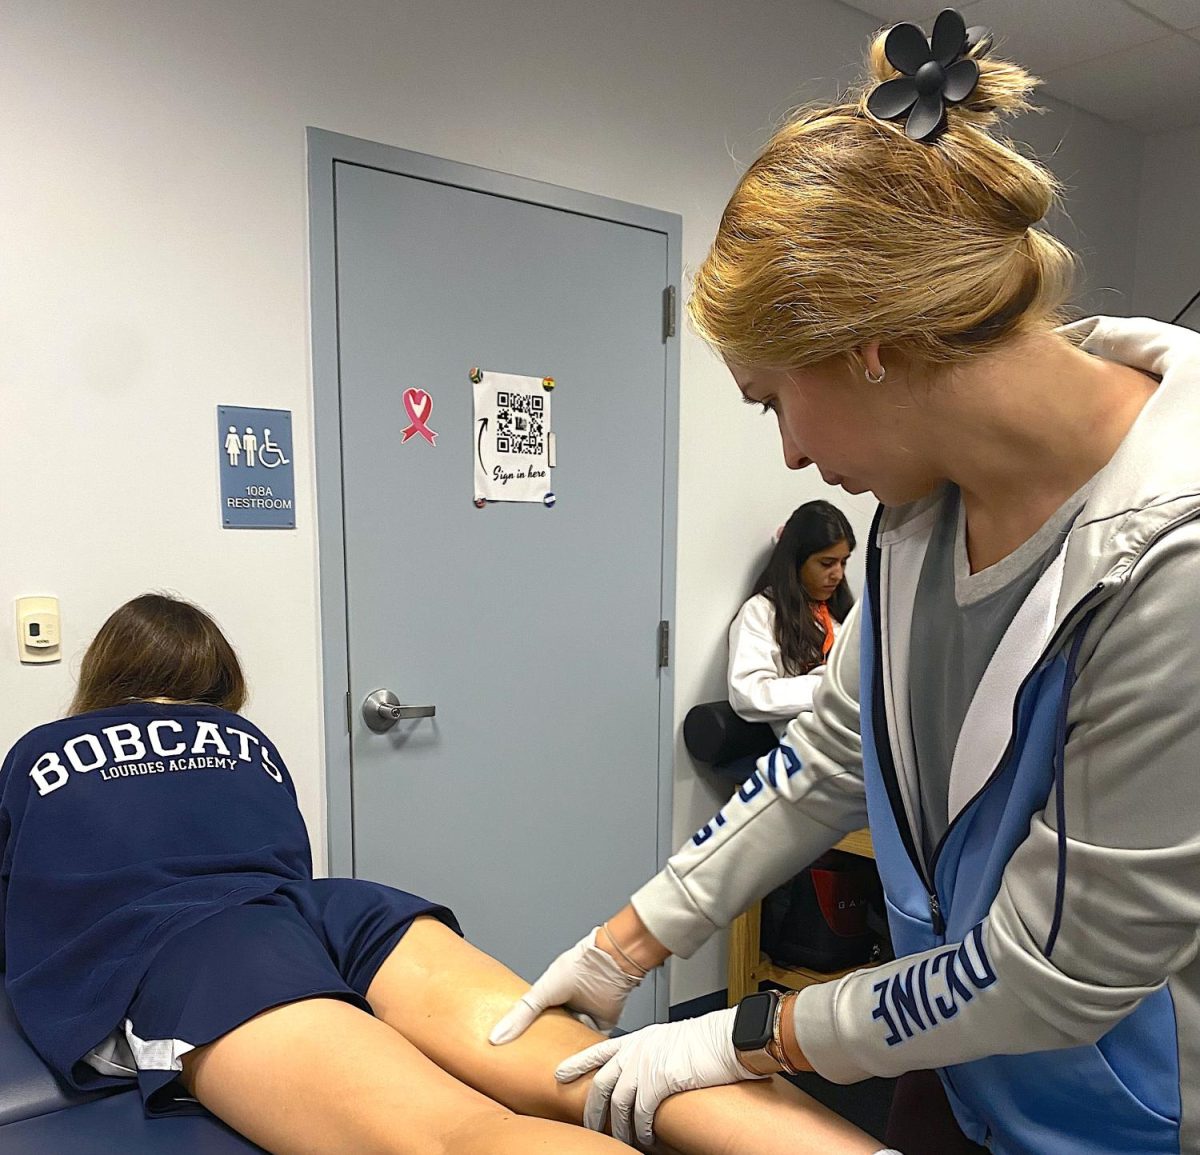 Belinda+helps+with+the+Rehabilitation+of+many+school+athletes%2C+such+as+Senior+Ashley+Pennie.+Belinda+has+seen+her+everyday+for+two+weeks%2C+for+dry+needling+and+massages%2C+preparing+Pennie+for+the+upcoming+soccer+season.